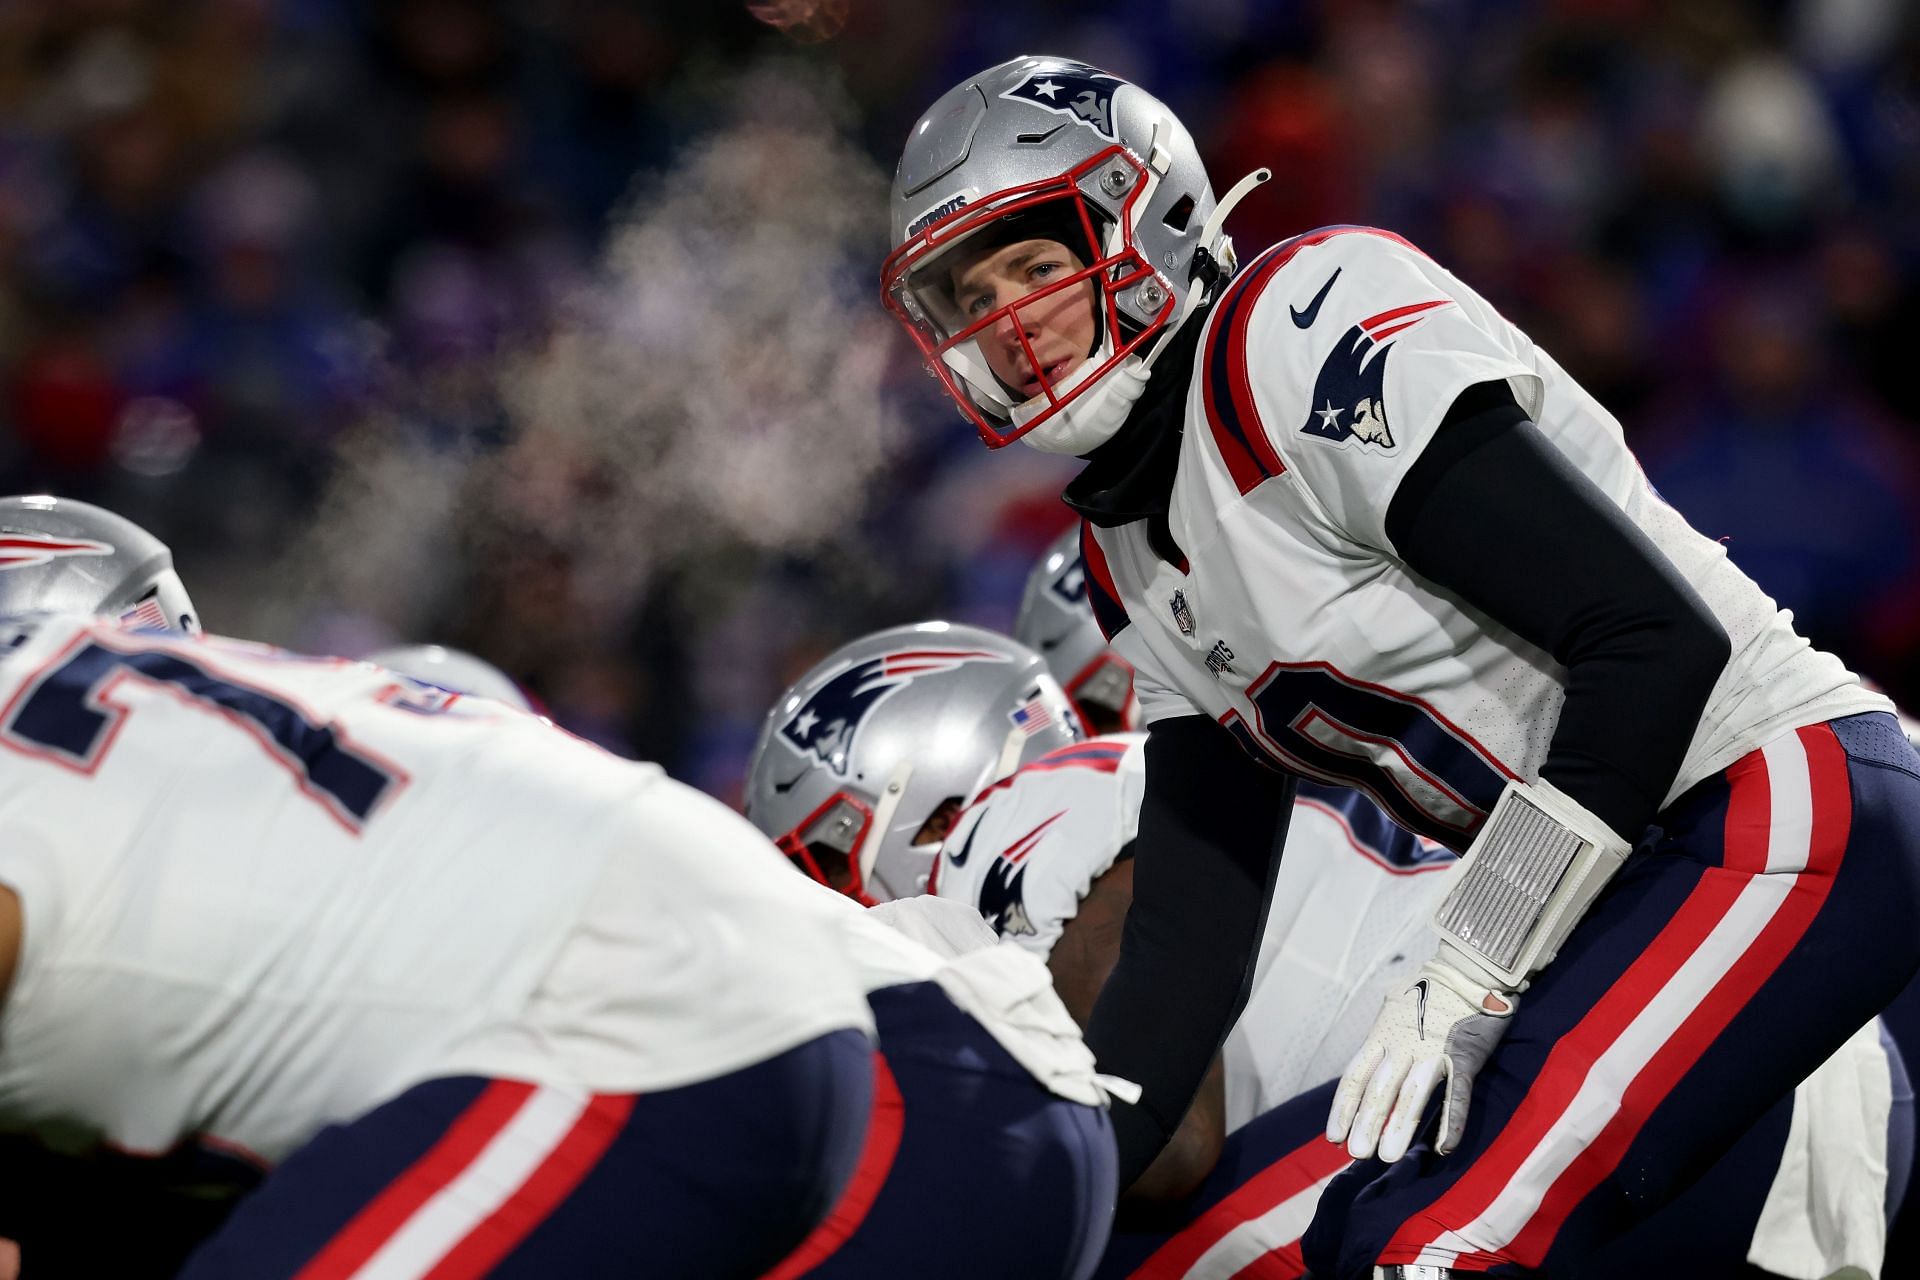 New England Patriots Schedule 2022 Dates, Time, Opponents and winloss